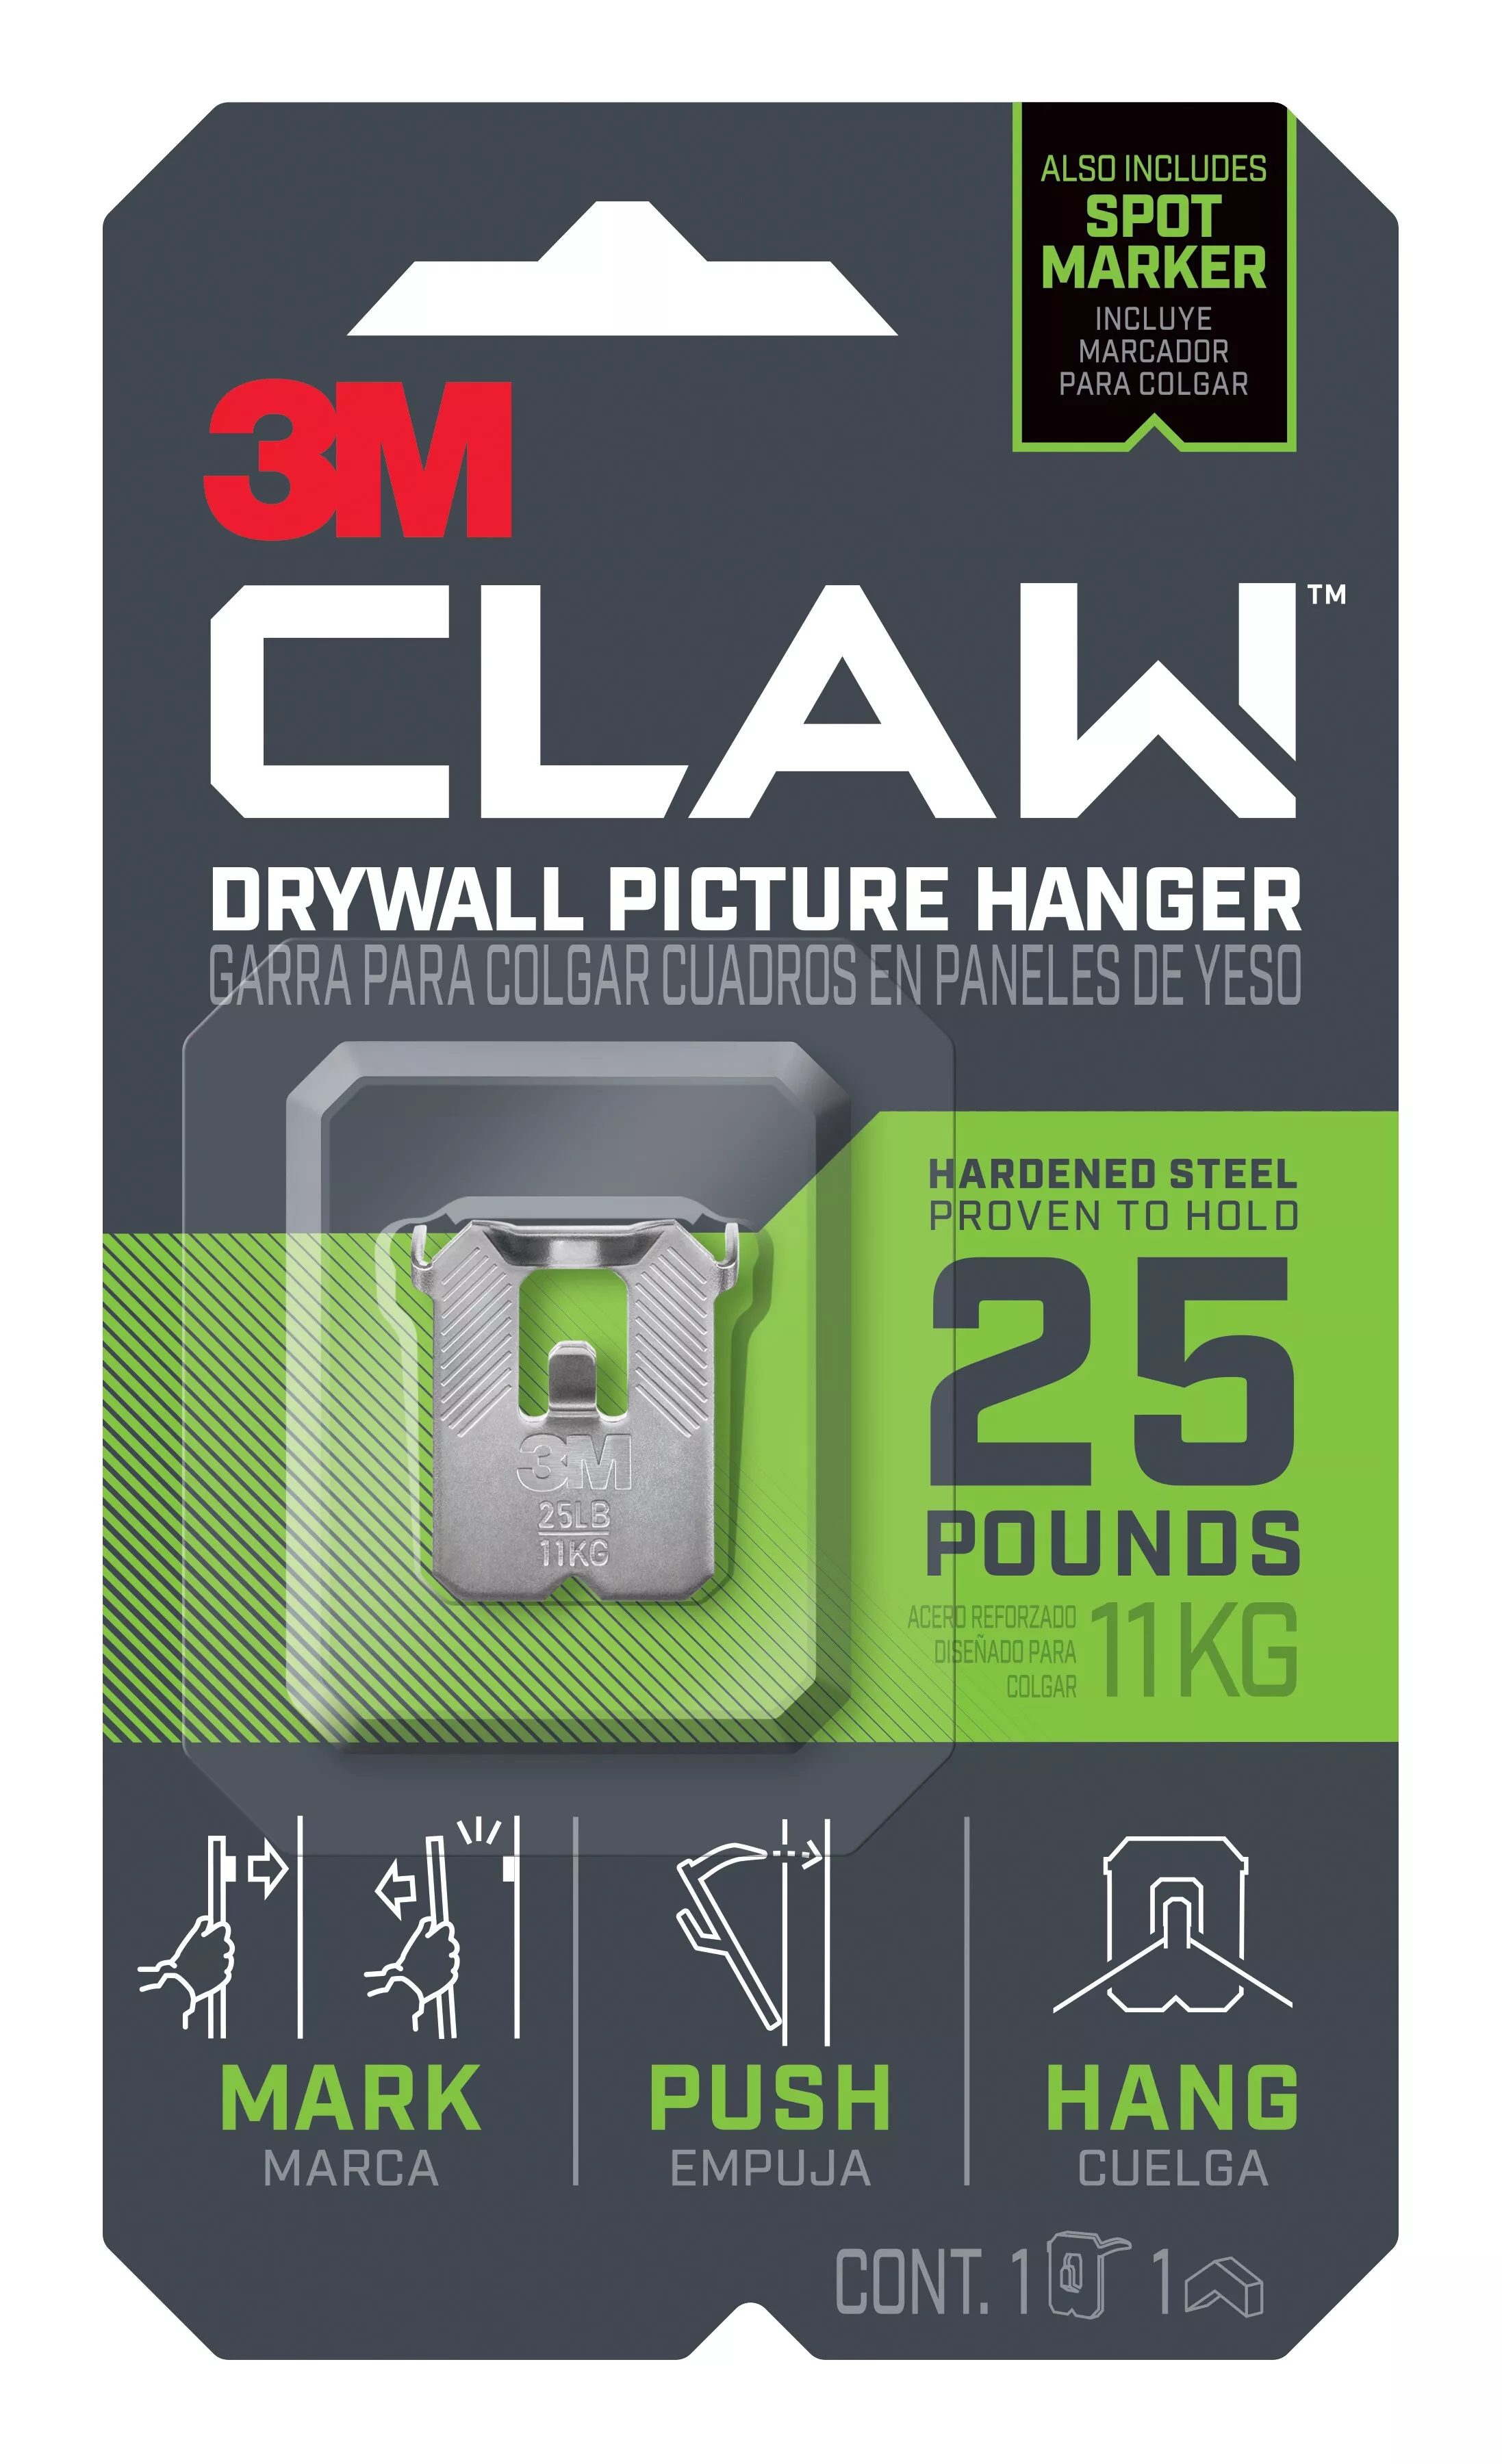 3M CLAW™ Drywall Picture Hanger 25 lb with Temporary Spot Marker 3PH25M-1EF, 1 hanger, 1 marker